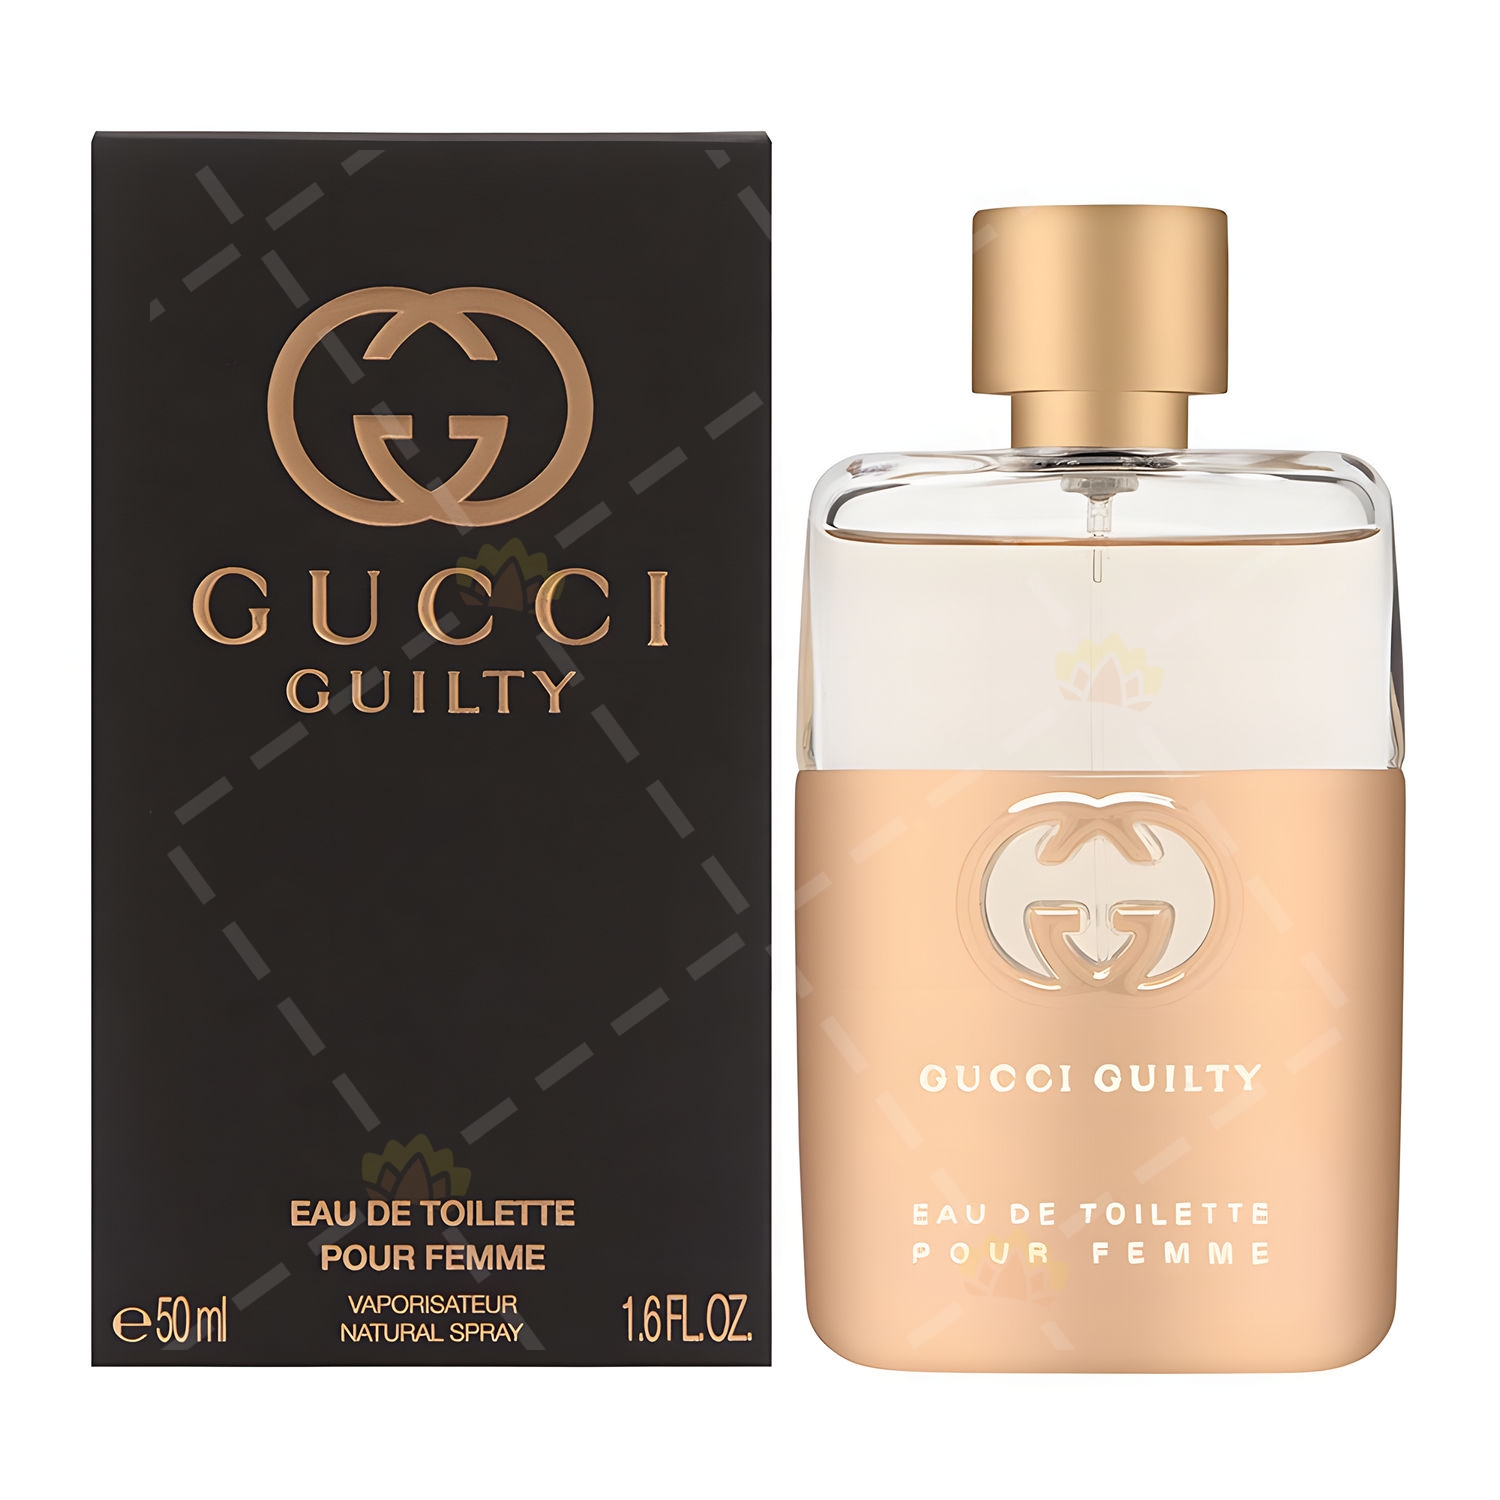 Gucci Guilty EDT POUR FEMME 淡香水50ml | BabyMall